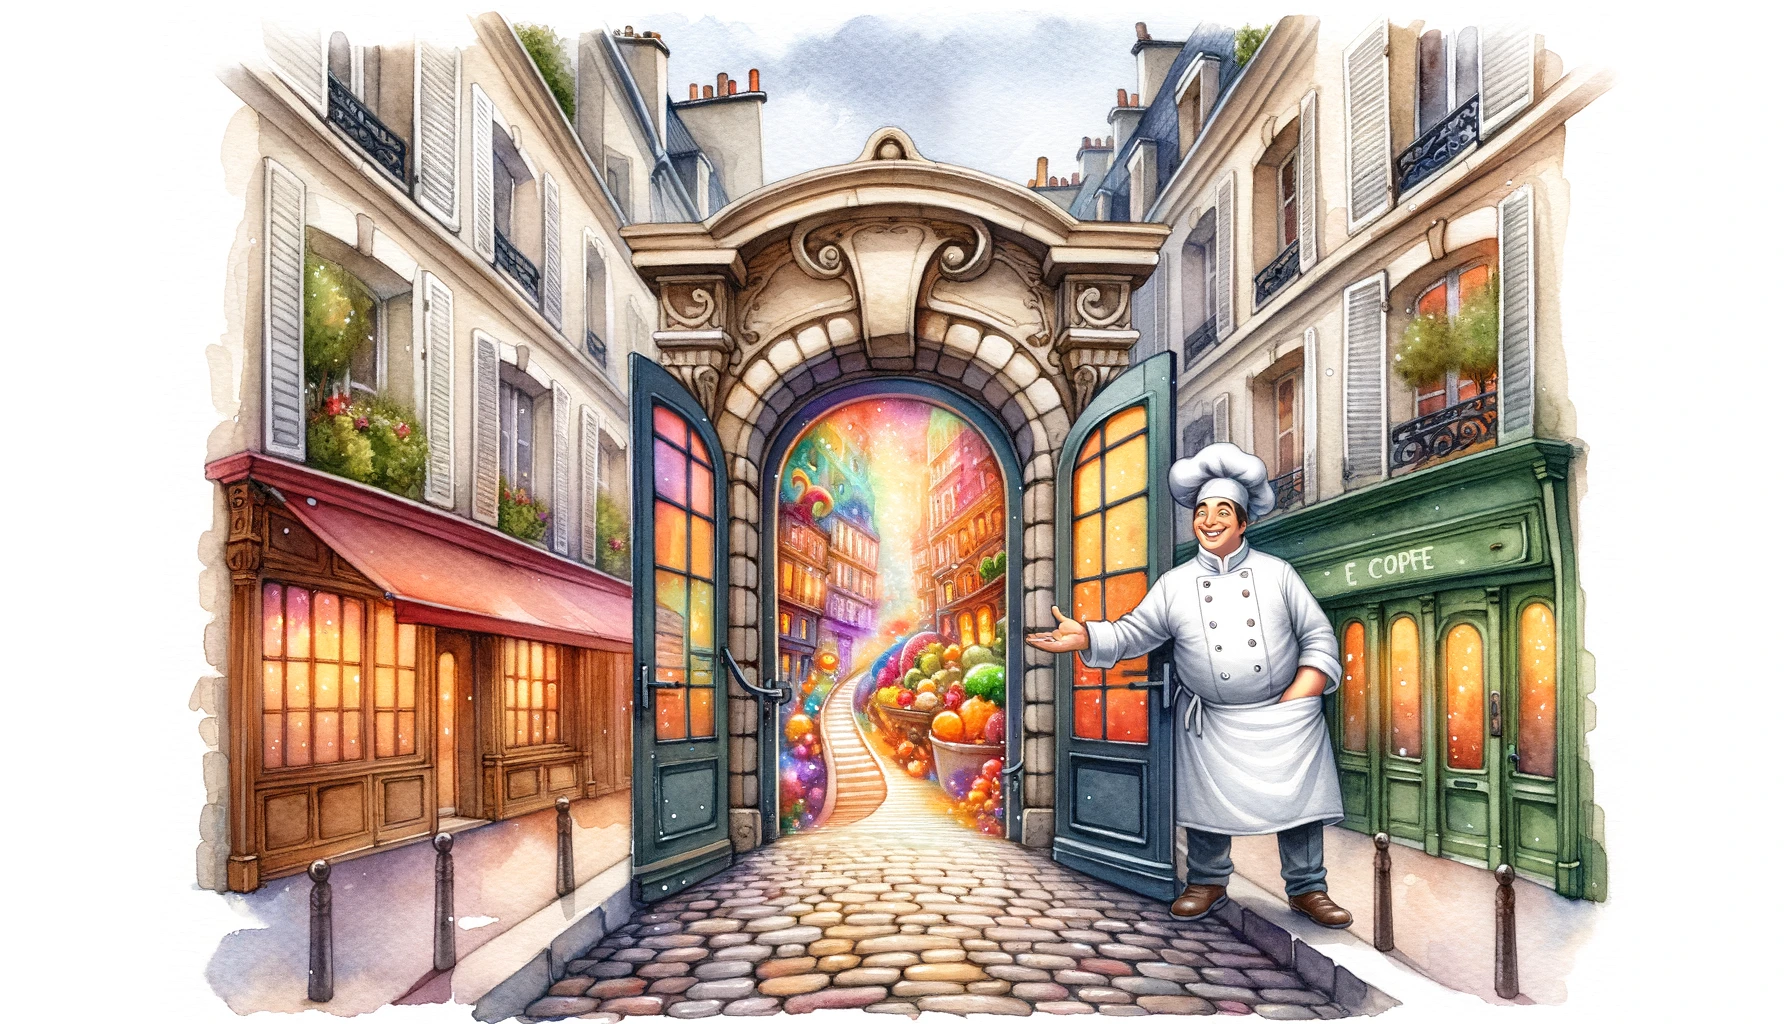 How to eat on a budget in Paris. The watercolor illustration of a cobbled Parisian street leading to a huge door, which opens onto a gastronomic adventure, has been created. A large, cheerful chef stands by the door, inviting viewers into a world of culinary delights. This scene captures the charming essence of Paris and the vibrant experiences awaiting those who venture through the door.